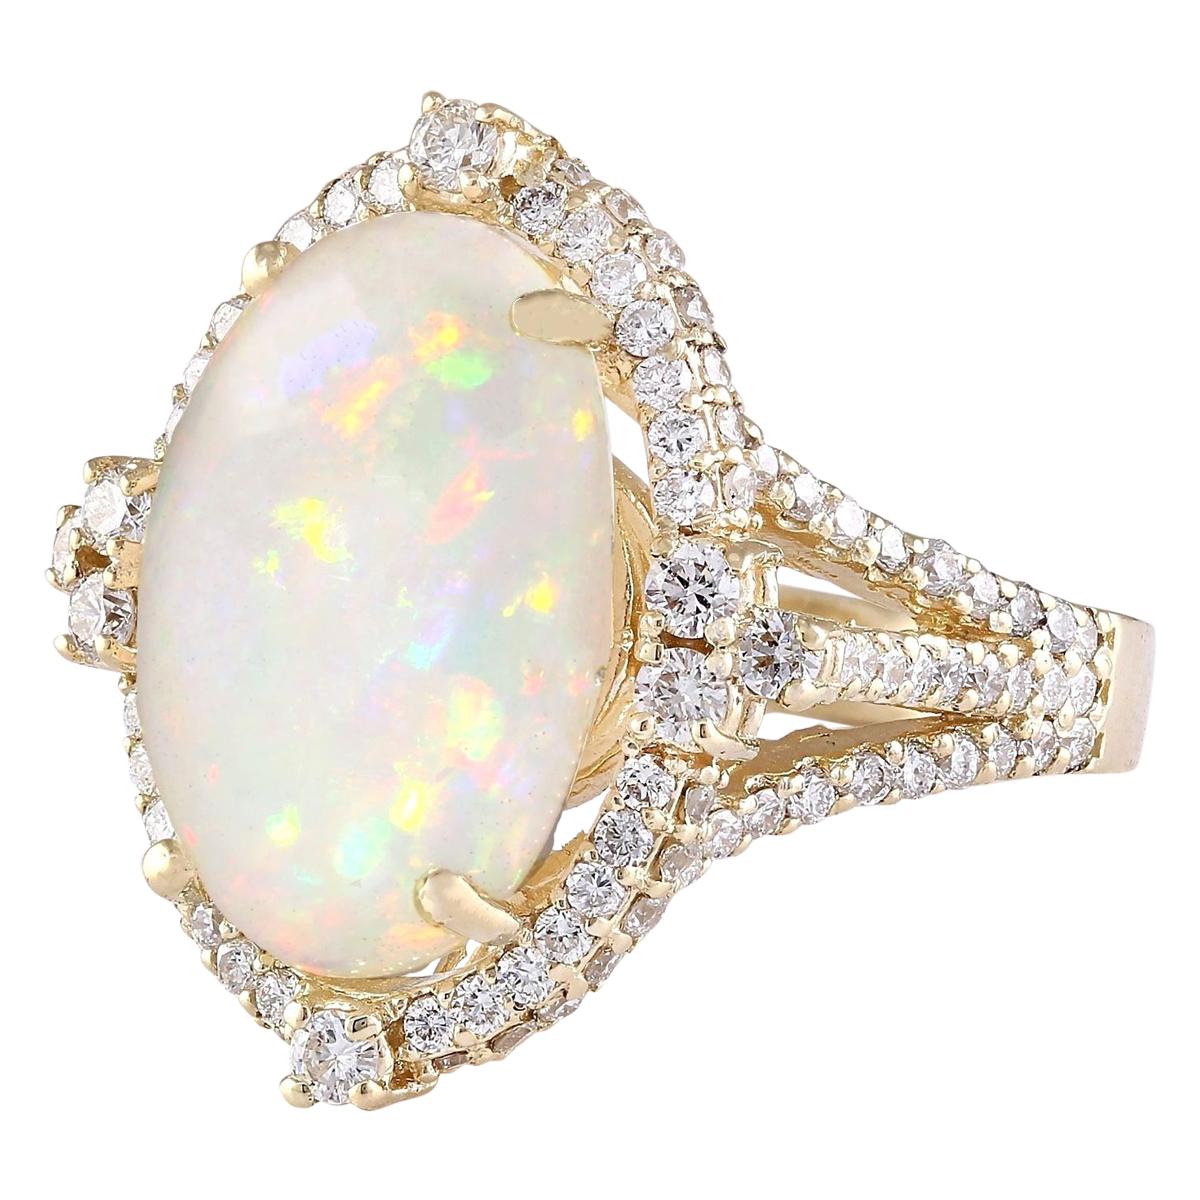 Introducing our exquisite 7.09 Carat Opal 14K Yellow Gold Diamond Ring, a stunning blend of luxury and elegance. Crafted from authentic 14K Yellow Gold and stamped for authenticity, this ring boasts a total weight of 9.3 grams, ensuring both quality